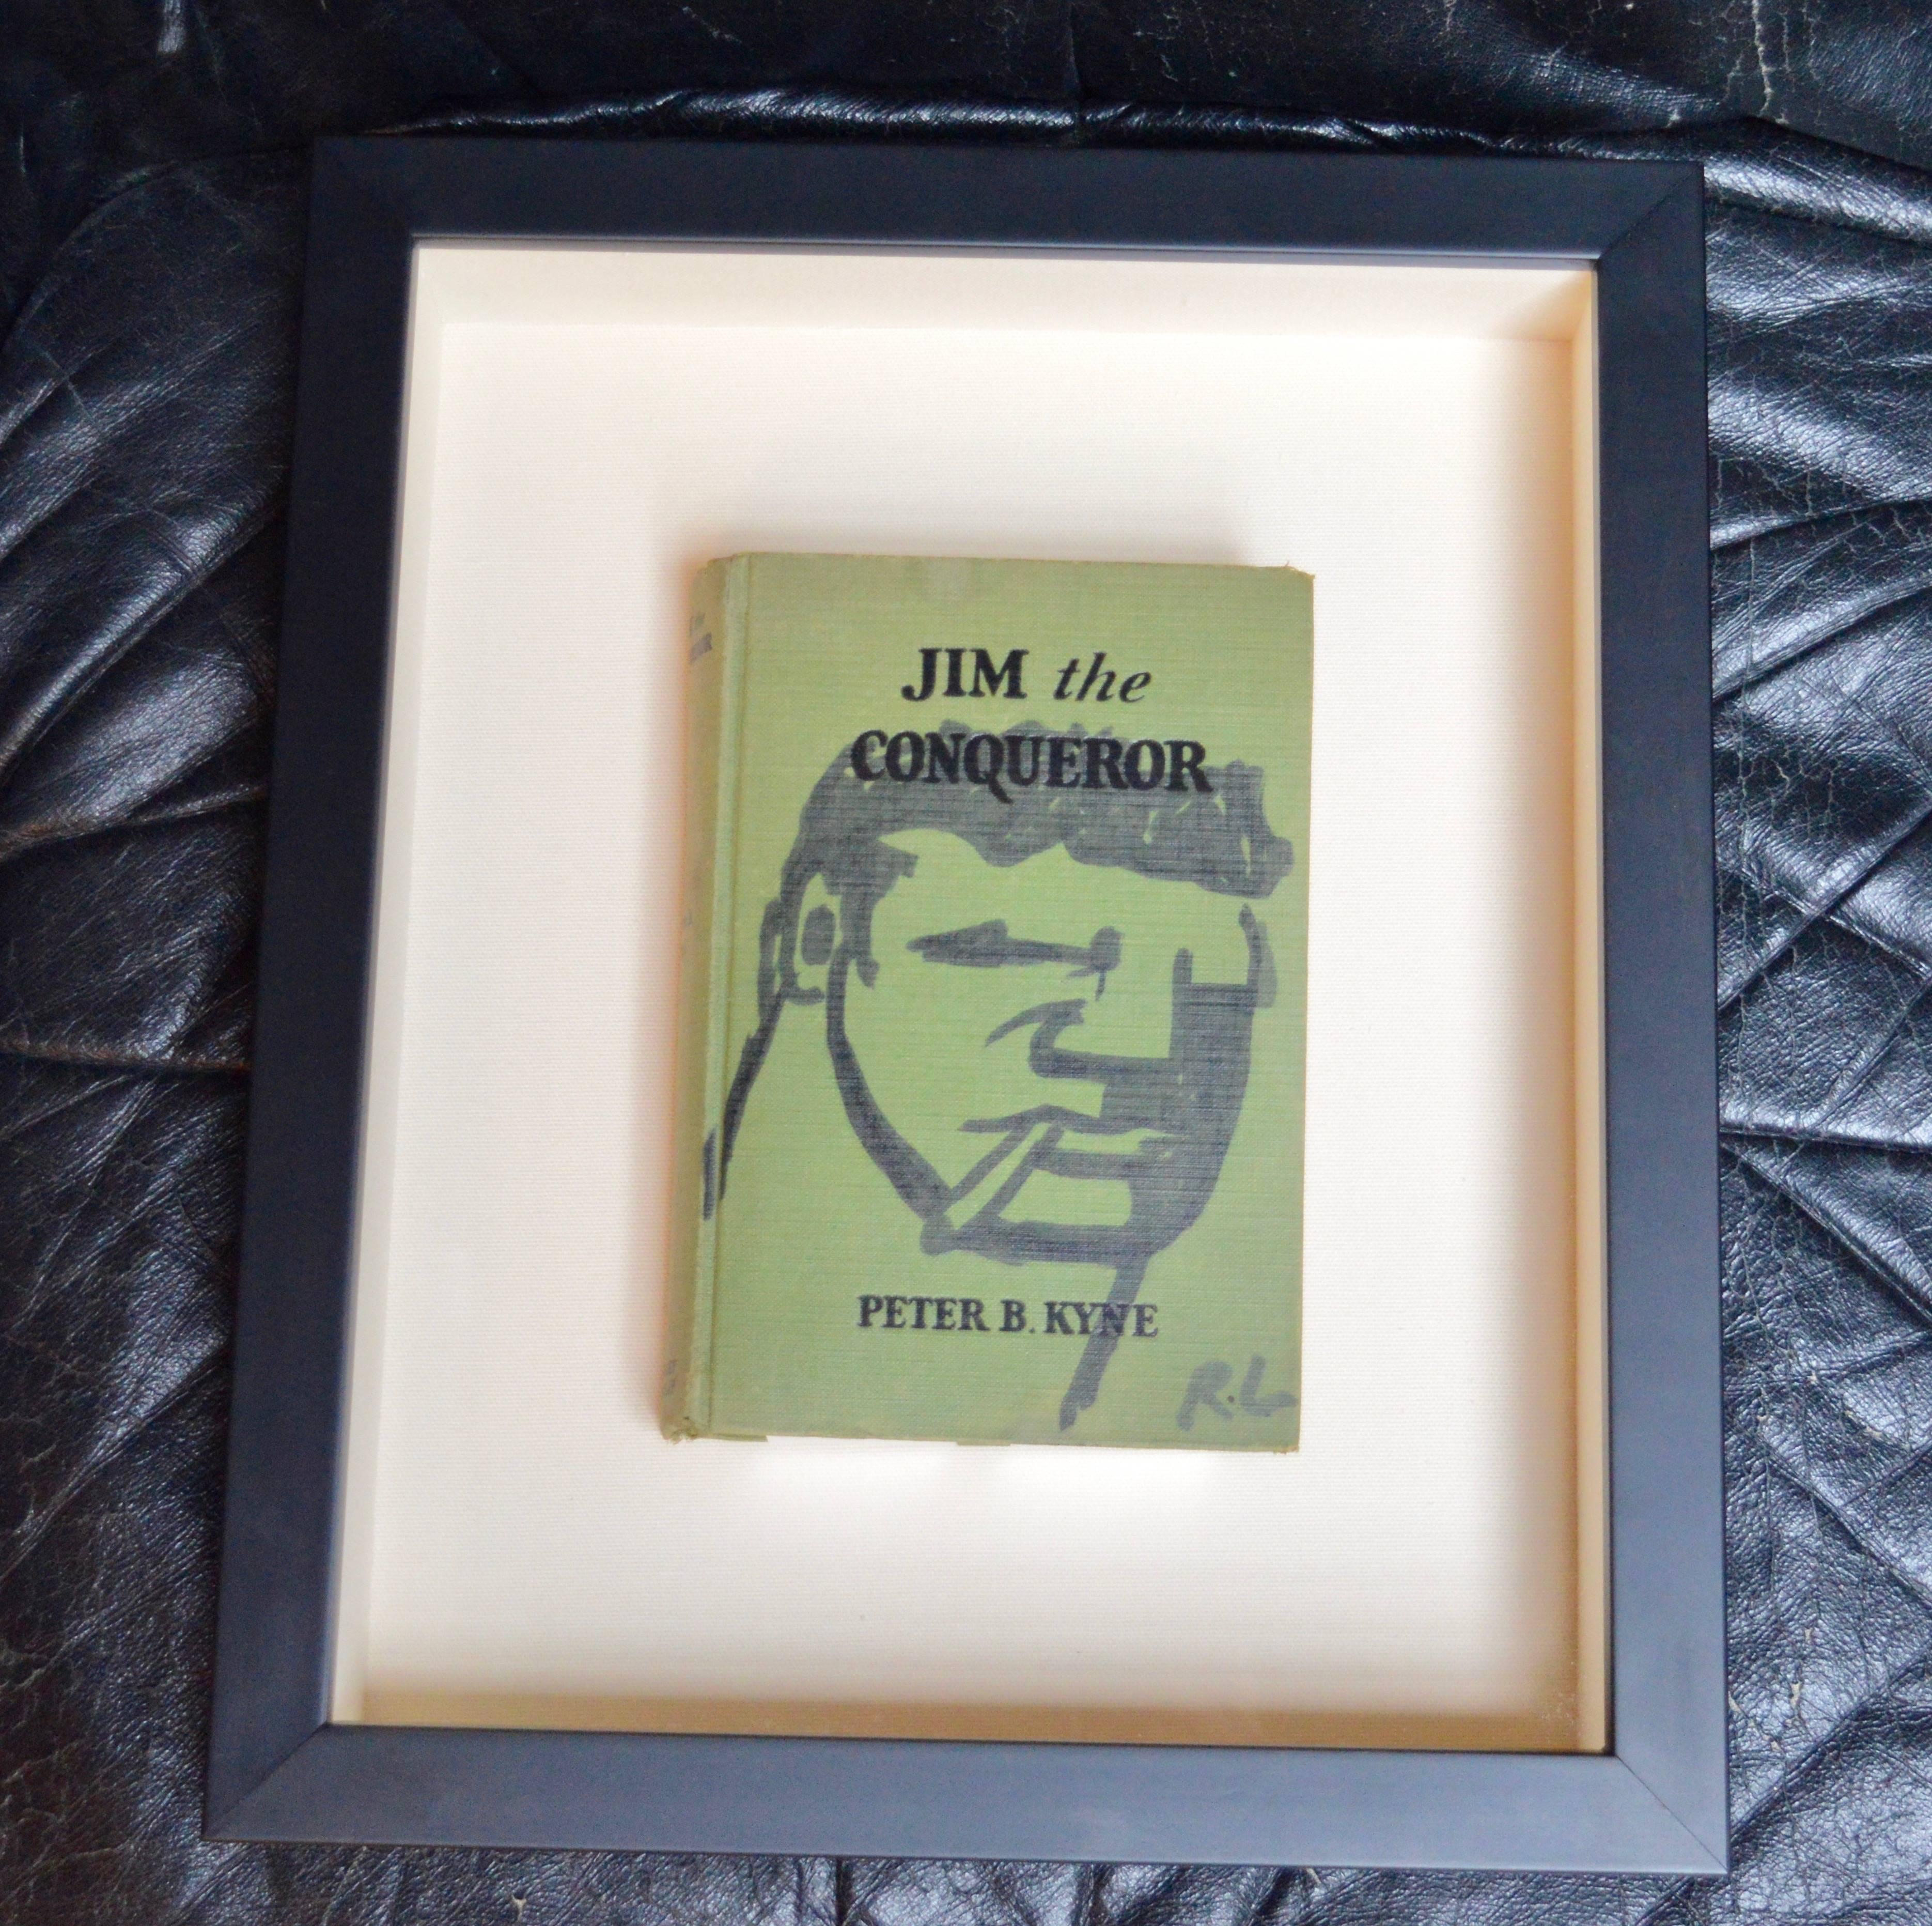 Fantastic original painting/drawing by Robert Loughlin on an old book. 1933 edition of Jim the Conqueror. Signed RL. Newly framed with UV protective plexiglass. Excellent condition. Comes with certificate of authenticity. 

Multiple Robert Loughlin